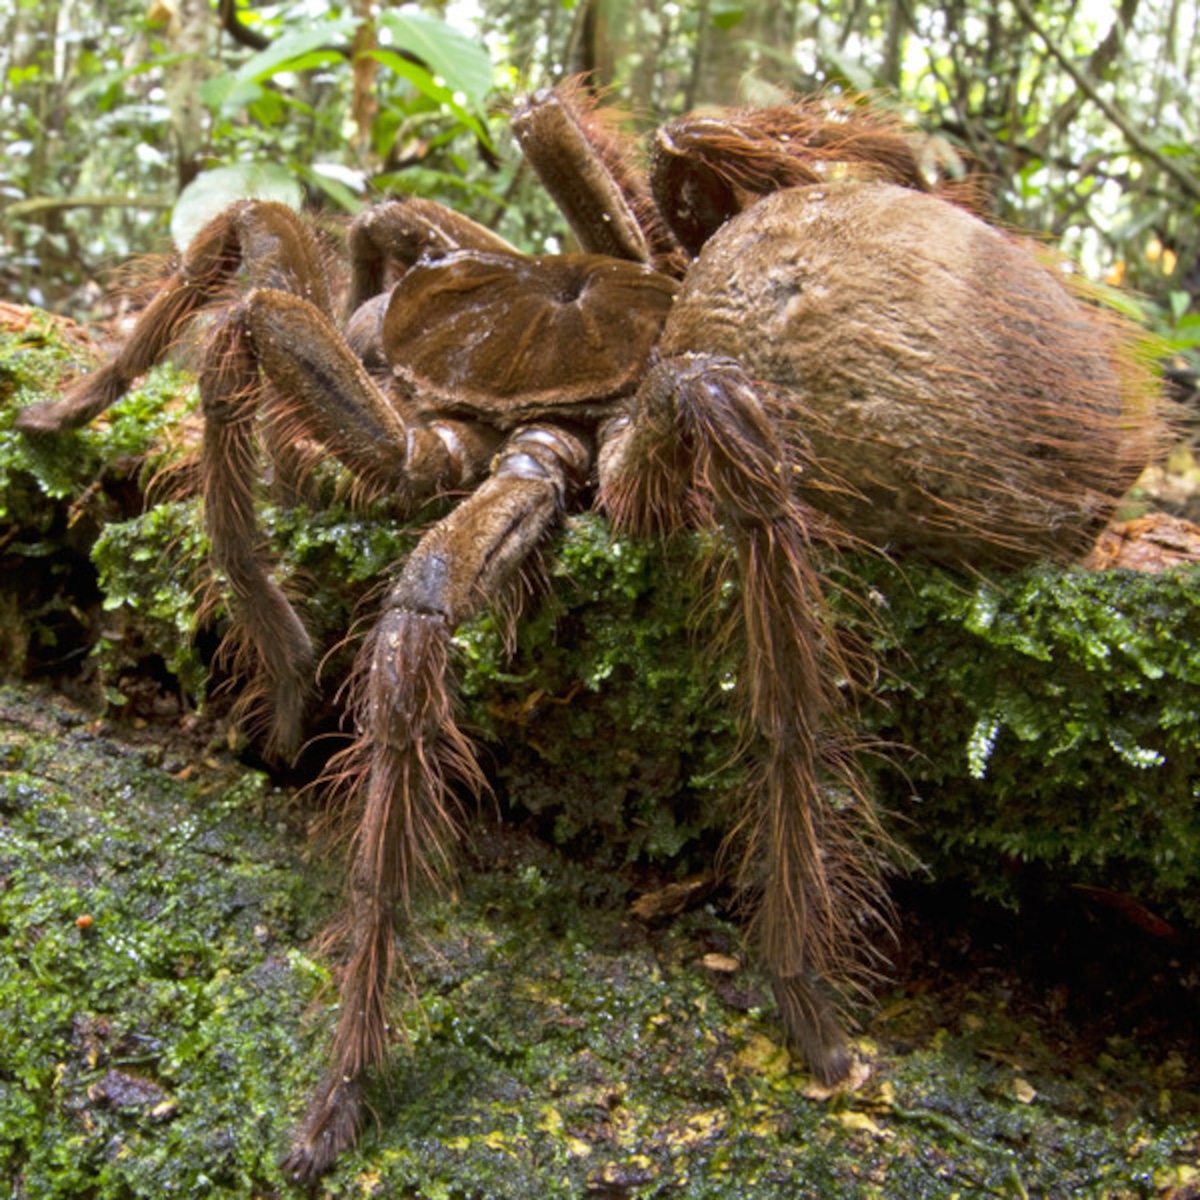 The Goliath Birdeater Spider Is a Creature of Nightmares